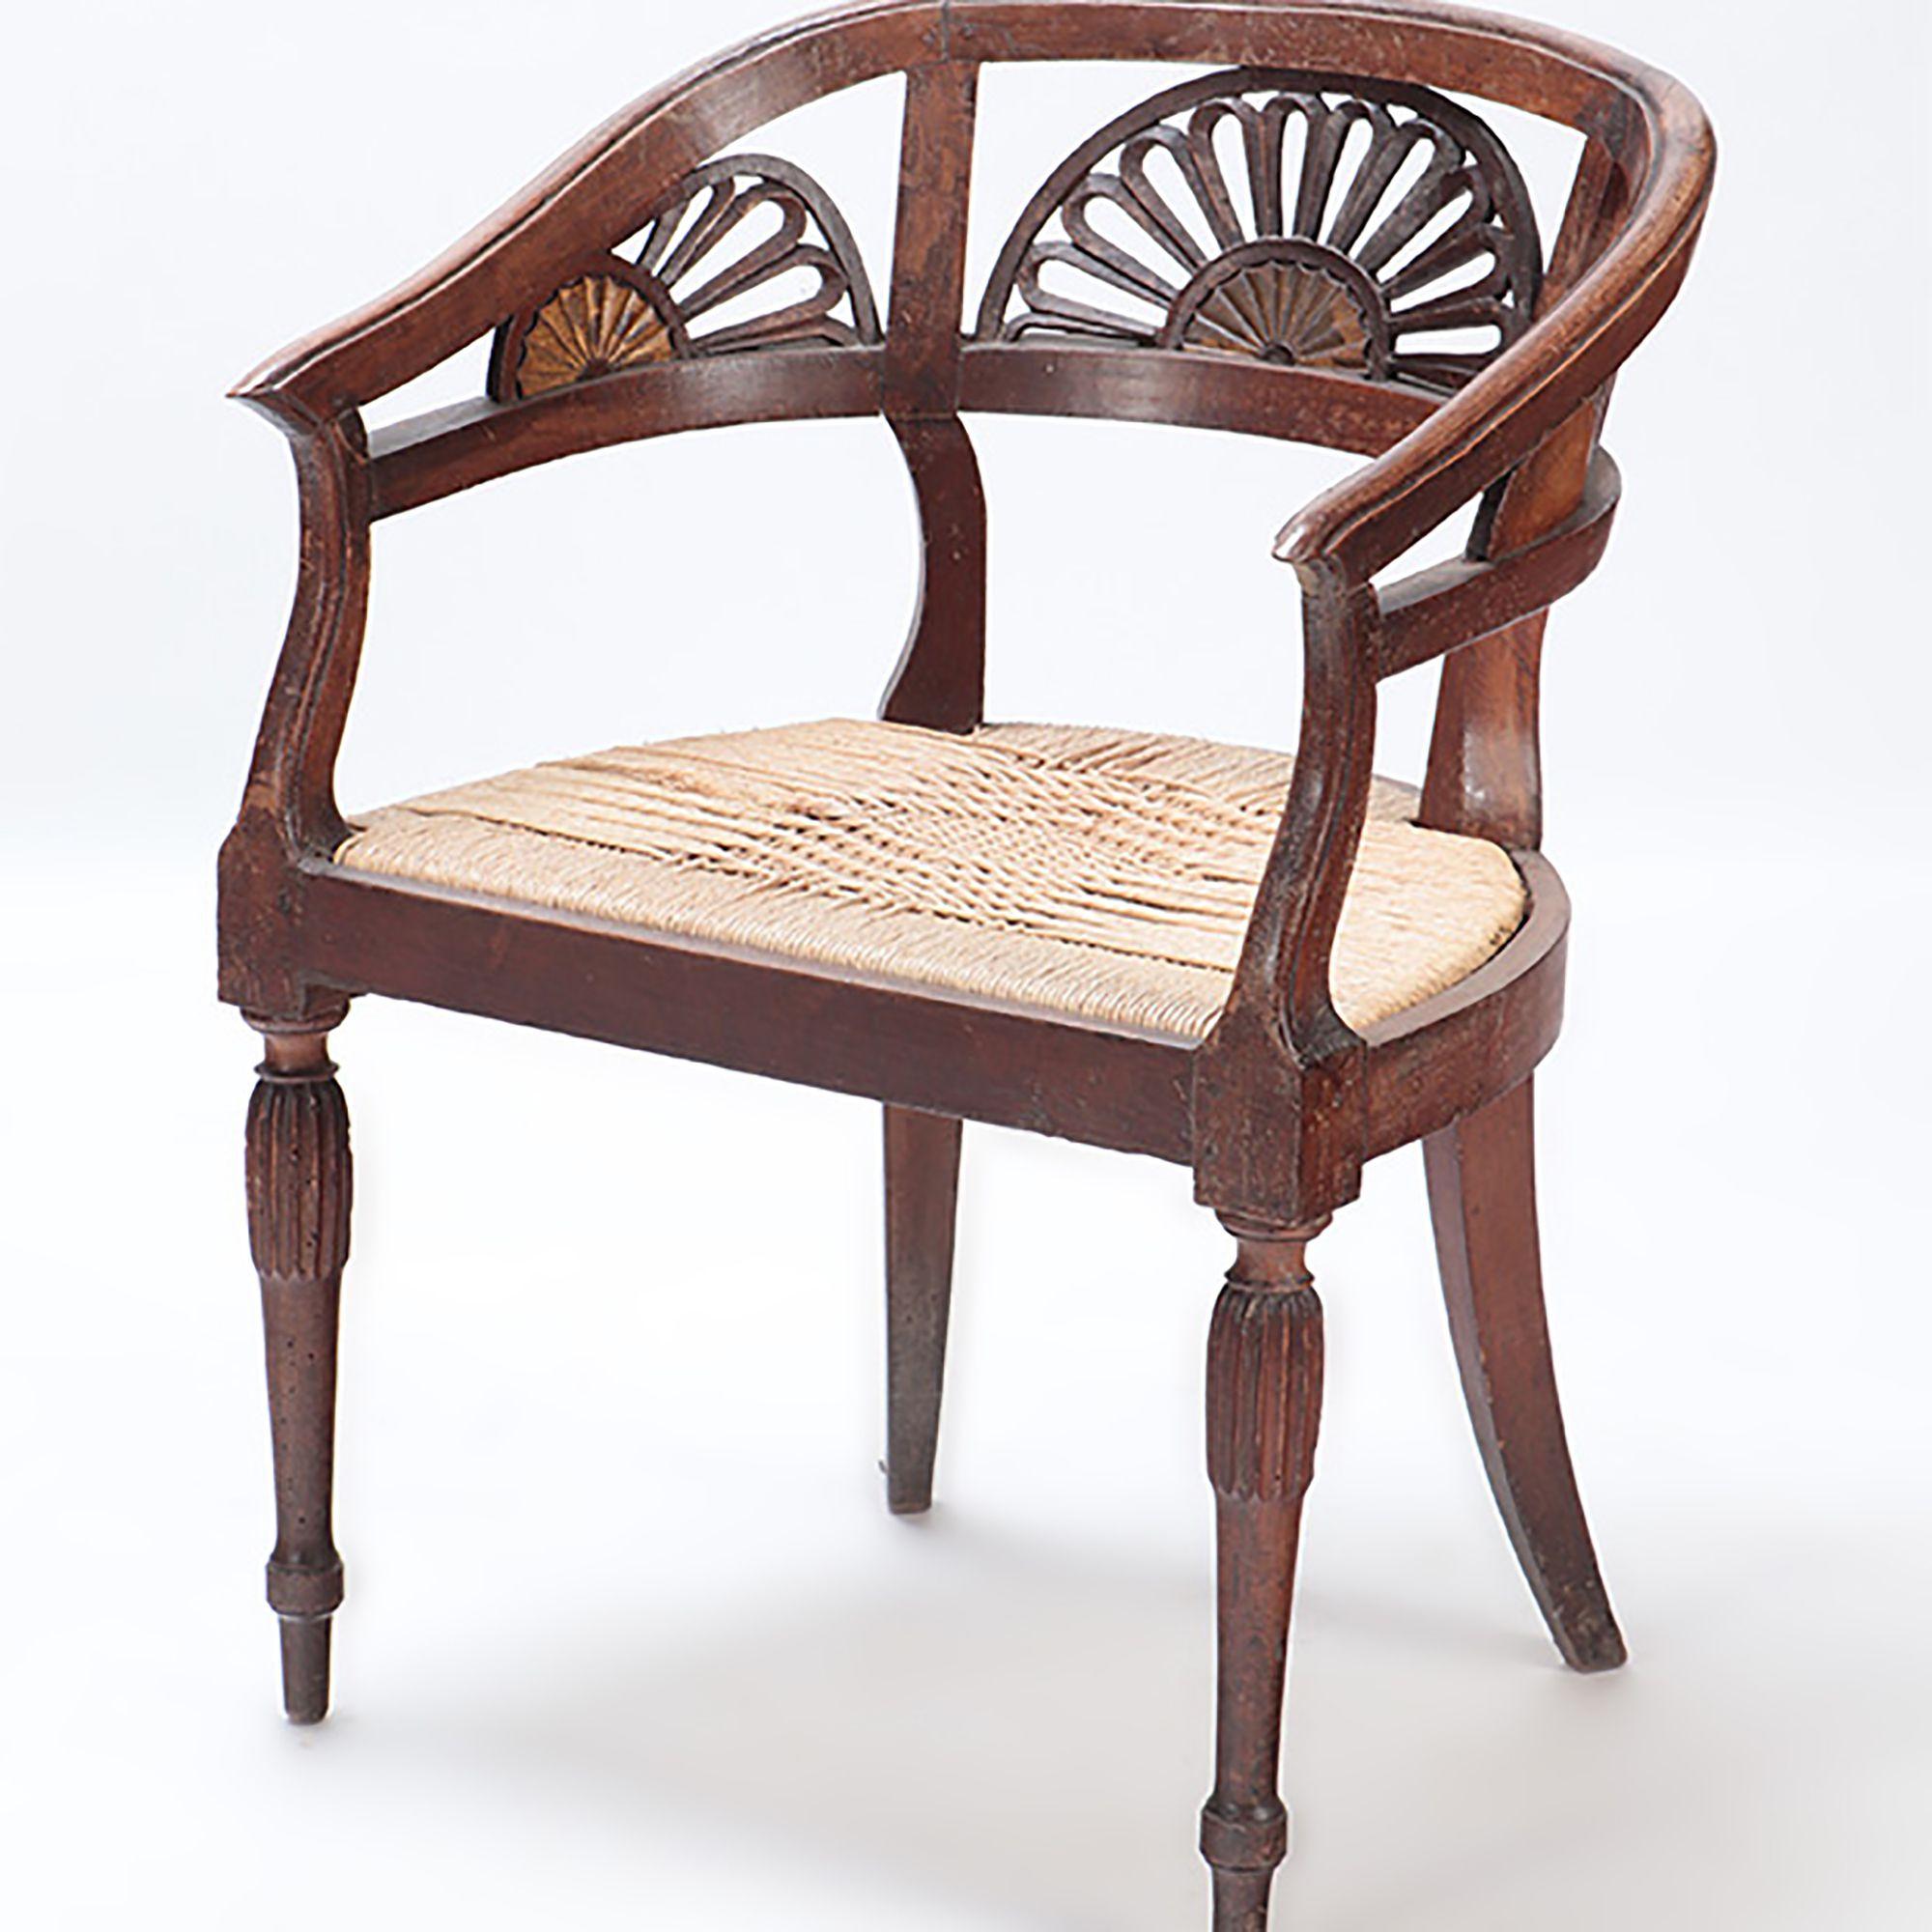 Pair of Italian Walnut Open Arm Chairs with Cord Seats, circa 1800 For Sale 3